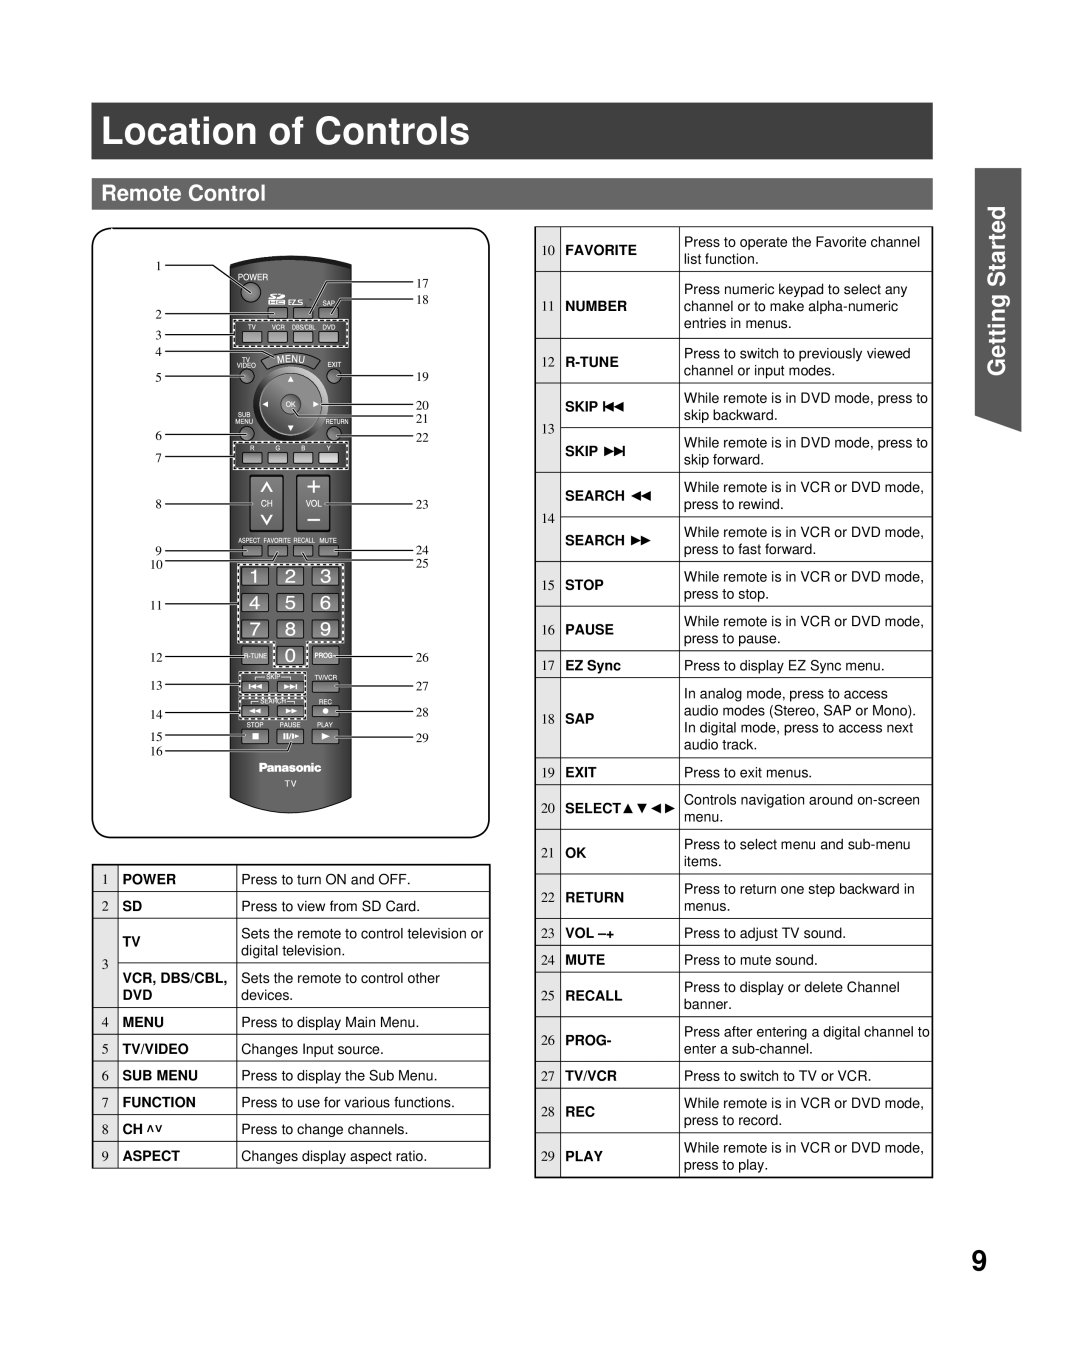 Panasonic PT-50LCZ70 operating instructions Location of Controls, Remote Control, Getting Started 